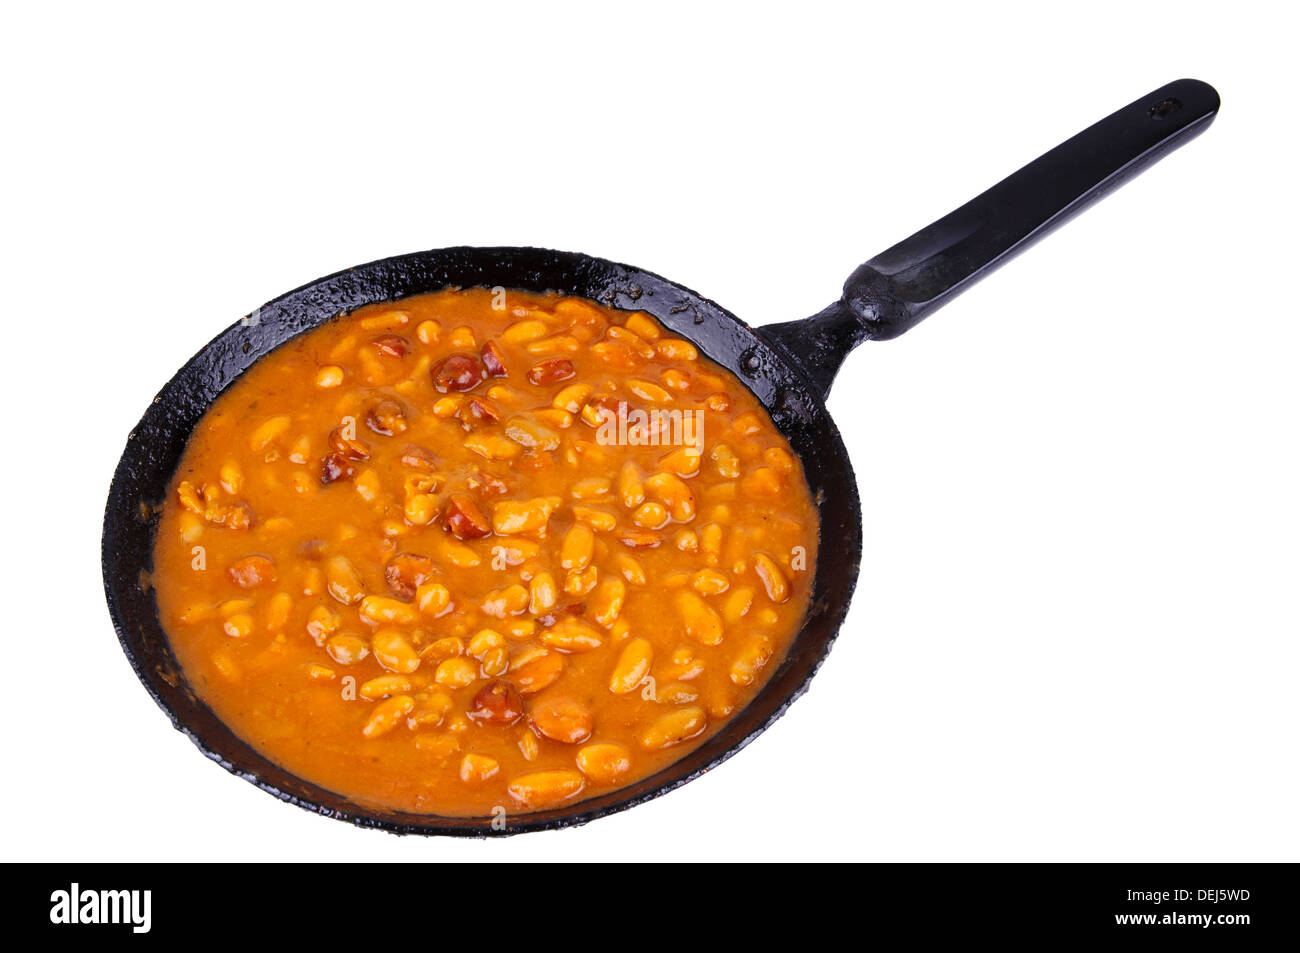 traditional homemade meal with beans and sausages in a pan isolated on a white background Stock Photo